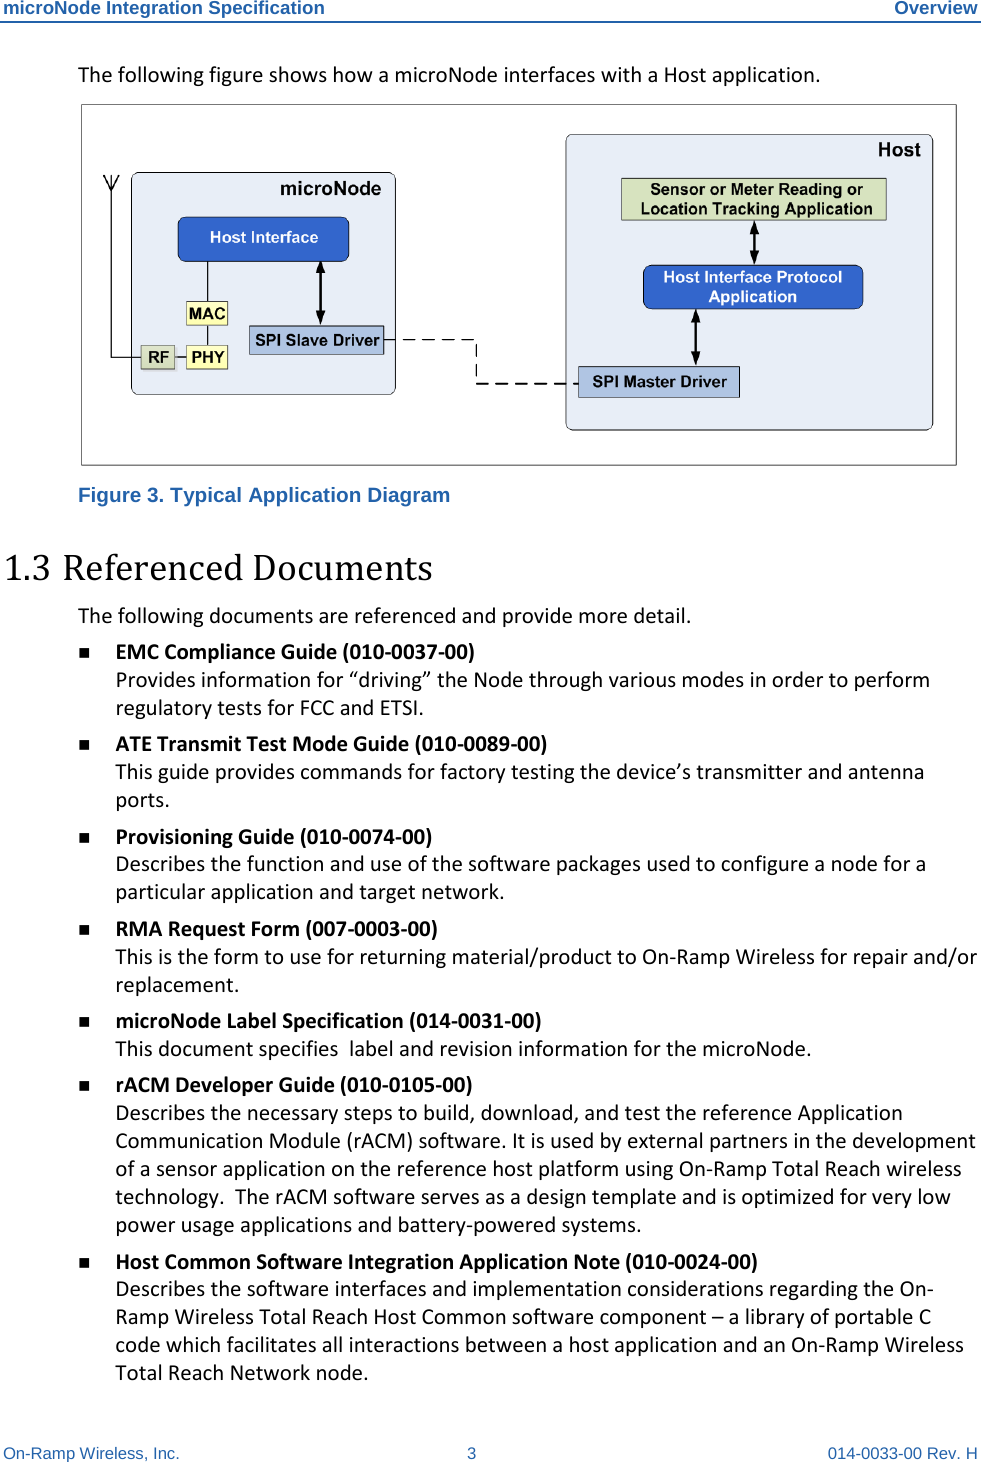 microNode Integration Specification Overview On-Ramp Wireless, Inc.  3  014-0033-00 Rev. H The following figure shows how a microNode interfaces with a Host application.  Figure 3. Typical Application Diagram 1.3 Referenced Documents The following documents are referenced and provide more detail.  EMC Compliance Guide (010-0037-00) Provides information for “driving” the Node through various modes in order to perform regulatory tests for FCC and ETSI.  ATE Transmit Test Mode Guide (010-0089-00) This guide provides commands for factory testing the device’s transmitter and antenna ports.  Provisioning Guide (010-0074-00)  Describes the function and use of the software packages used to configure a node for a particular application and target network.  RMA Request Form (007-0003-00) This is the form to use for returning material/product to On-Ramp Wireless for repair and/or replacement.  microNode Label Specification (014-0031-00) This document specifies  label and revision information for the microNode.  rACM Developer Guide (010-0105-00) Describes the necessary steps to build, download, and test the reference Application Communication Module (rACM) software. It is used by external partners in the development of a sensor application on the reference host platform using On-Ramp Total Reach wireless technology.  The rACM software serves as a design template and is optimized for very low power usage applications and battery-powered systems.  Host Common Software Integration Application Note (010-0024-00) Describes the software interfaces and implementation considerations regarding the On-Ramp Wireless Total Reach Host Common software component – a library of portable C code which facilitates all interactions between a host application and an On-Ramp Wireless Total Reach Network node.   